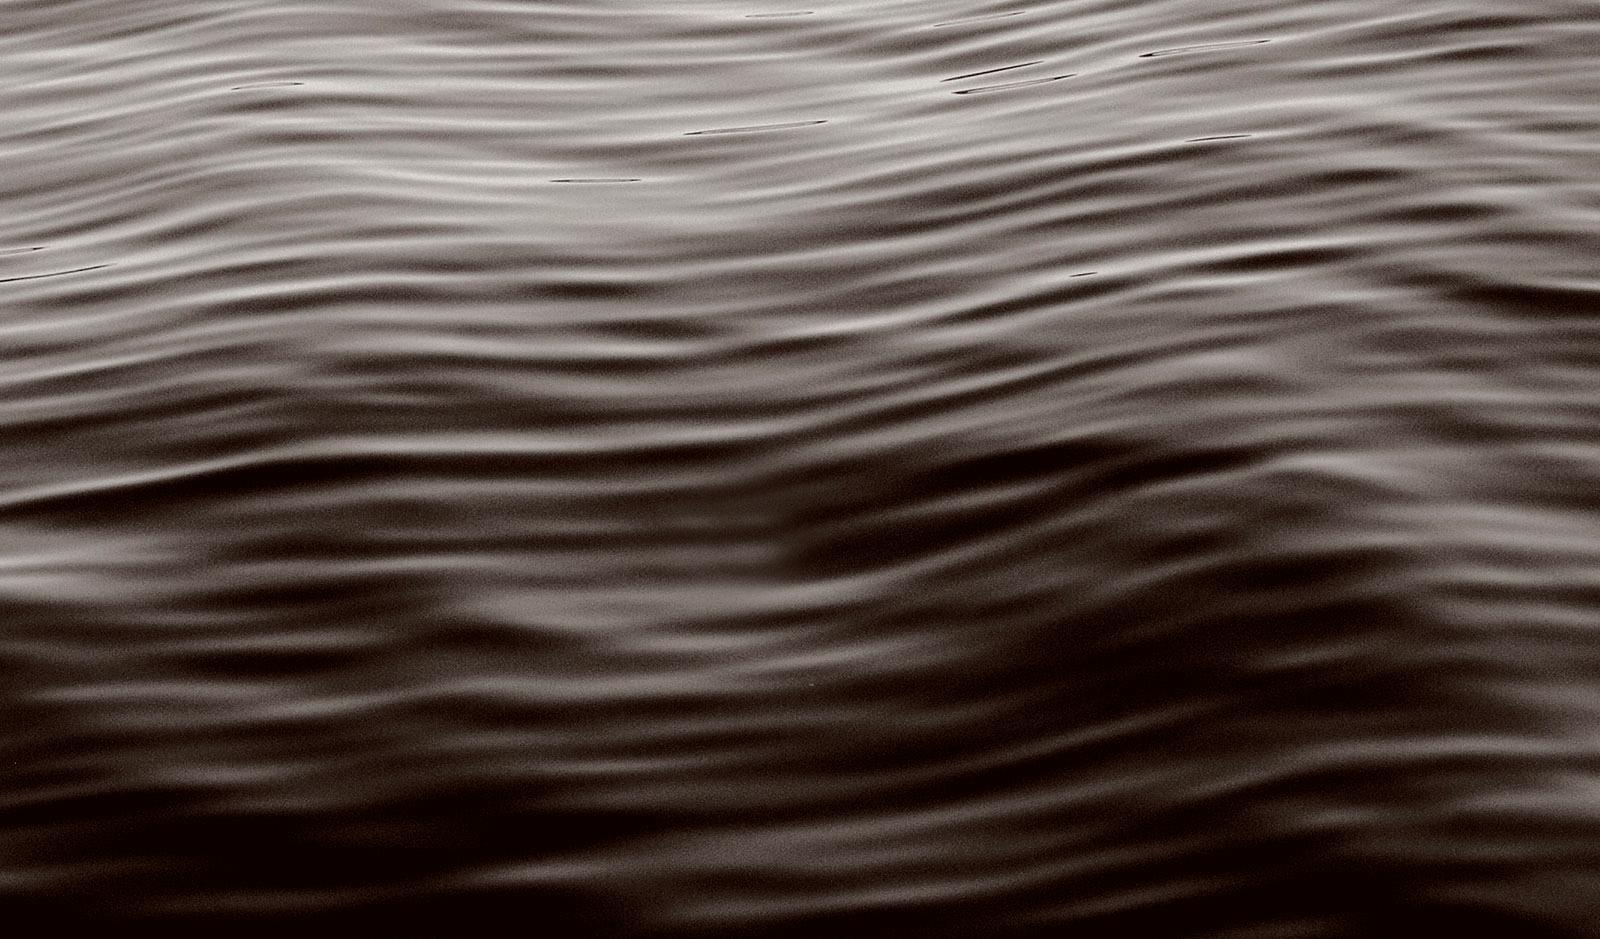 Flowing 1  -  Large scale photograph by Michael Banks -Archival Pigment print on fiber based paper ( Hahnemühle Photo RAG Baryta 315 gsm )

Limited Editions of 5  , signed + numbered by artist, with certificate of authenticity 

Archival pigment